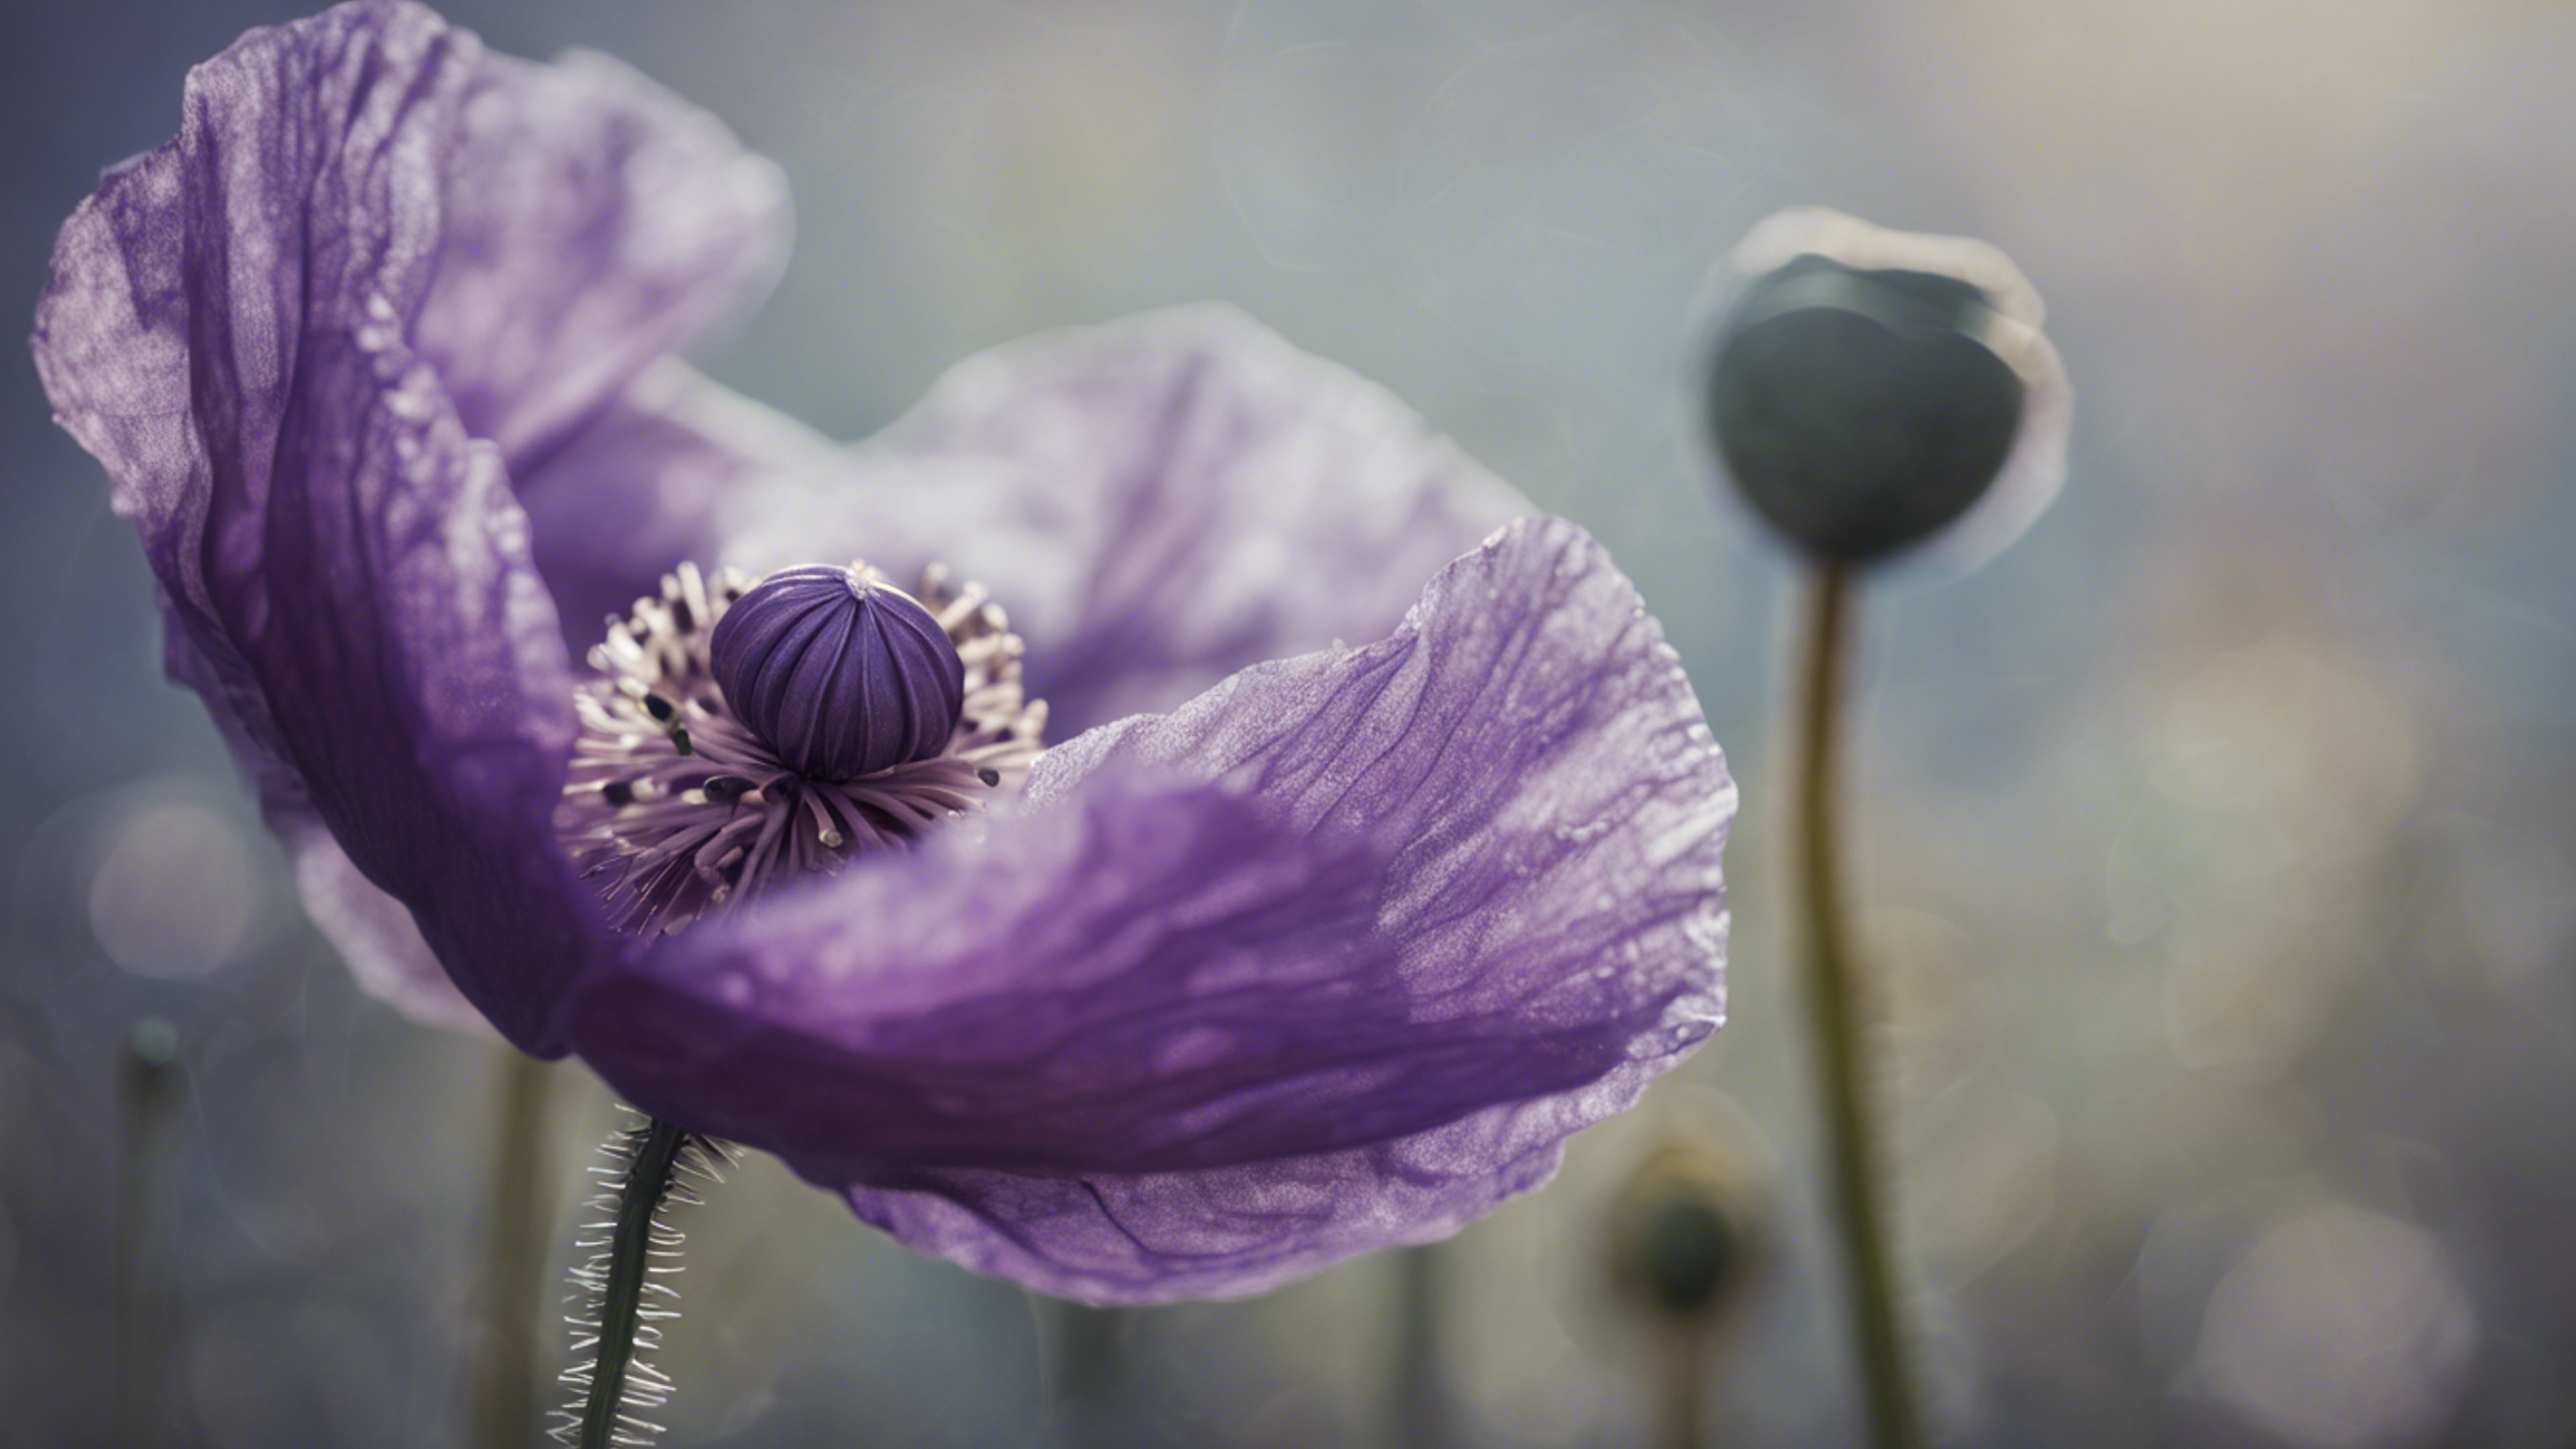 A close-up of a purple poppy with intricate details on a textured canvas. ផ្ទាំង​រូបភាព[f5d07fa5408f4773ae7b]